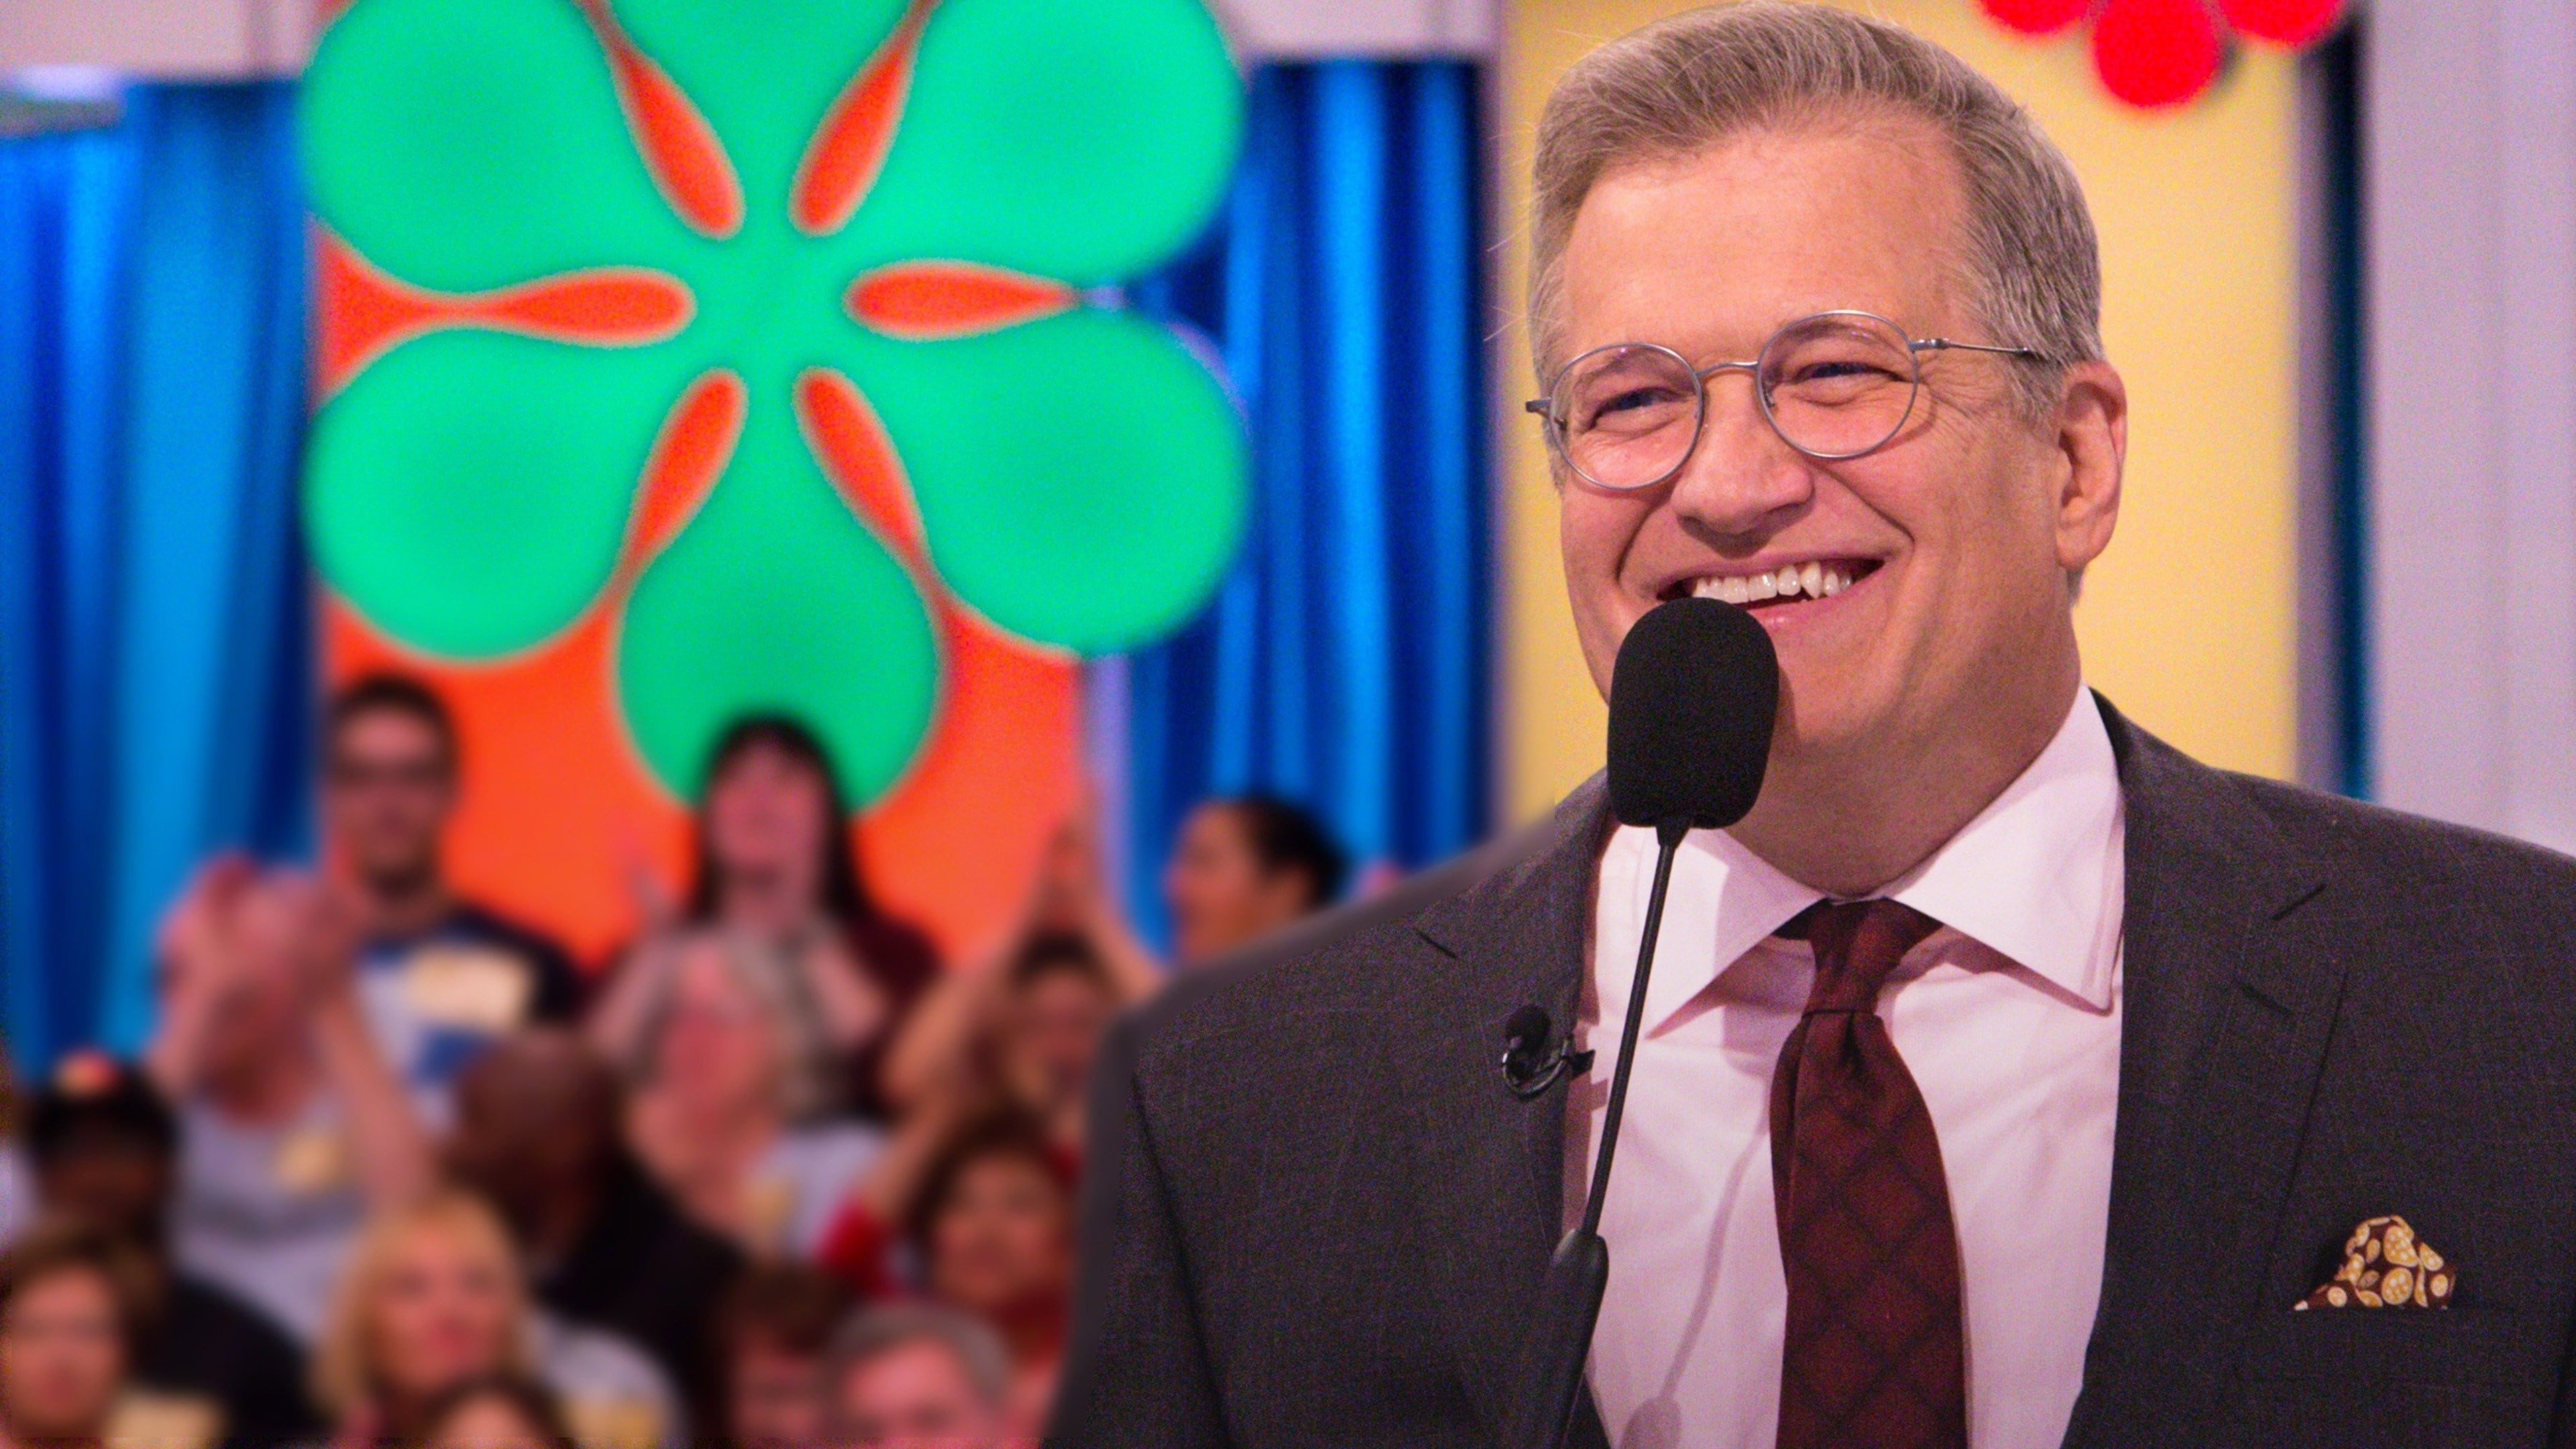 The Price Is Right - Season 5 Episode 103 : The Price Is Right Season 5 Episode 103